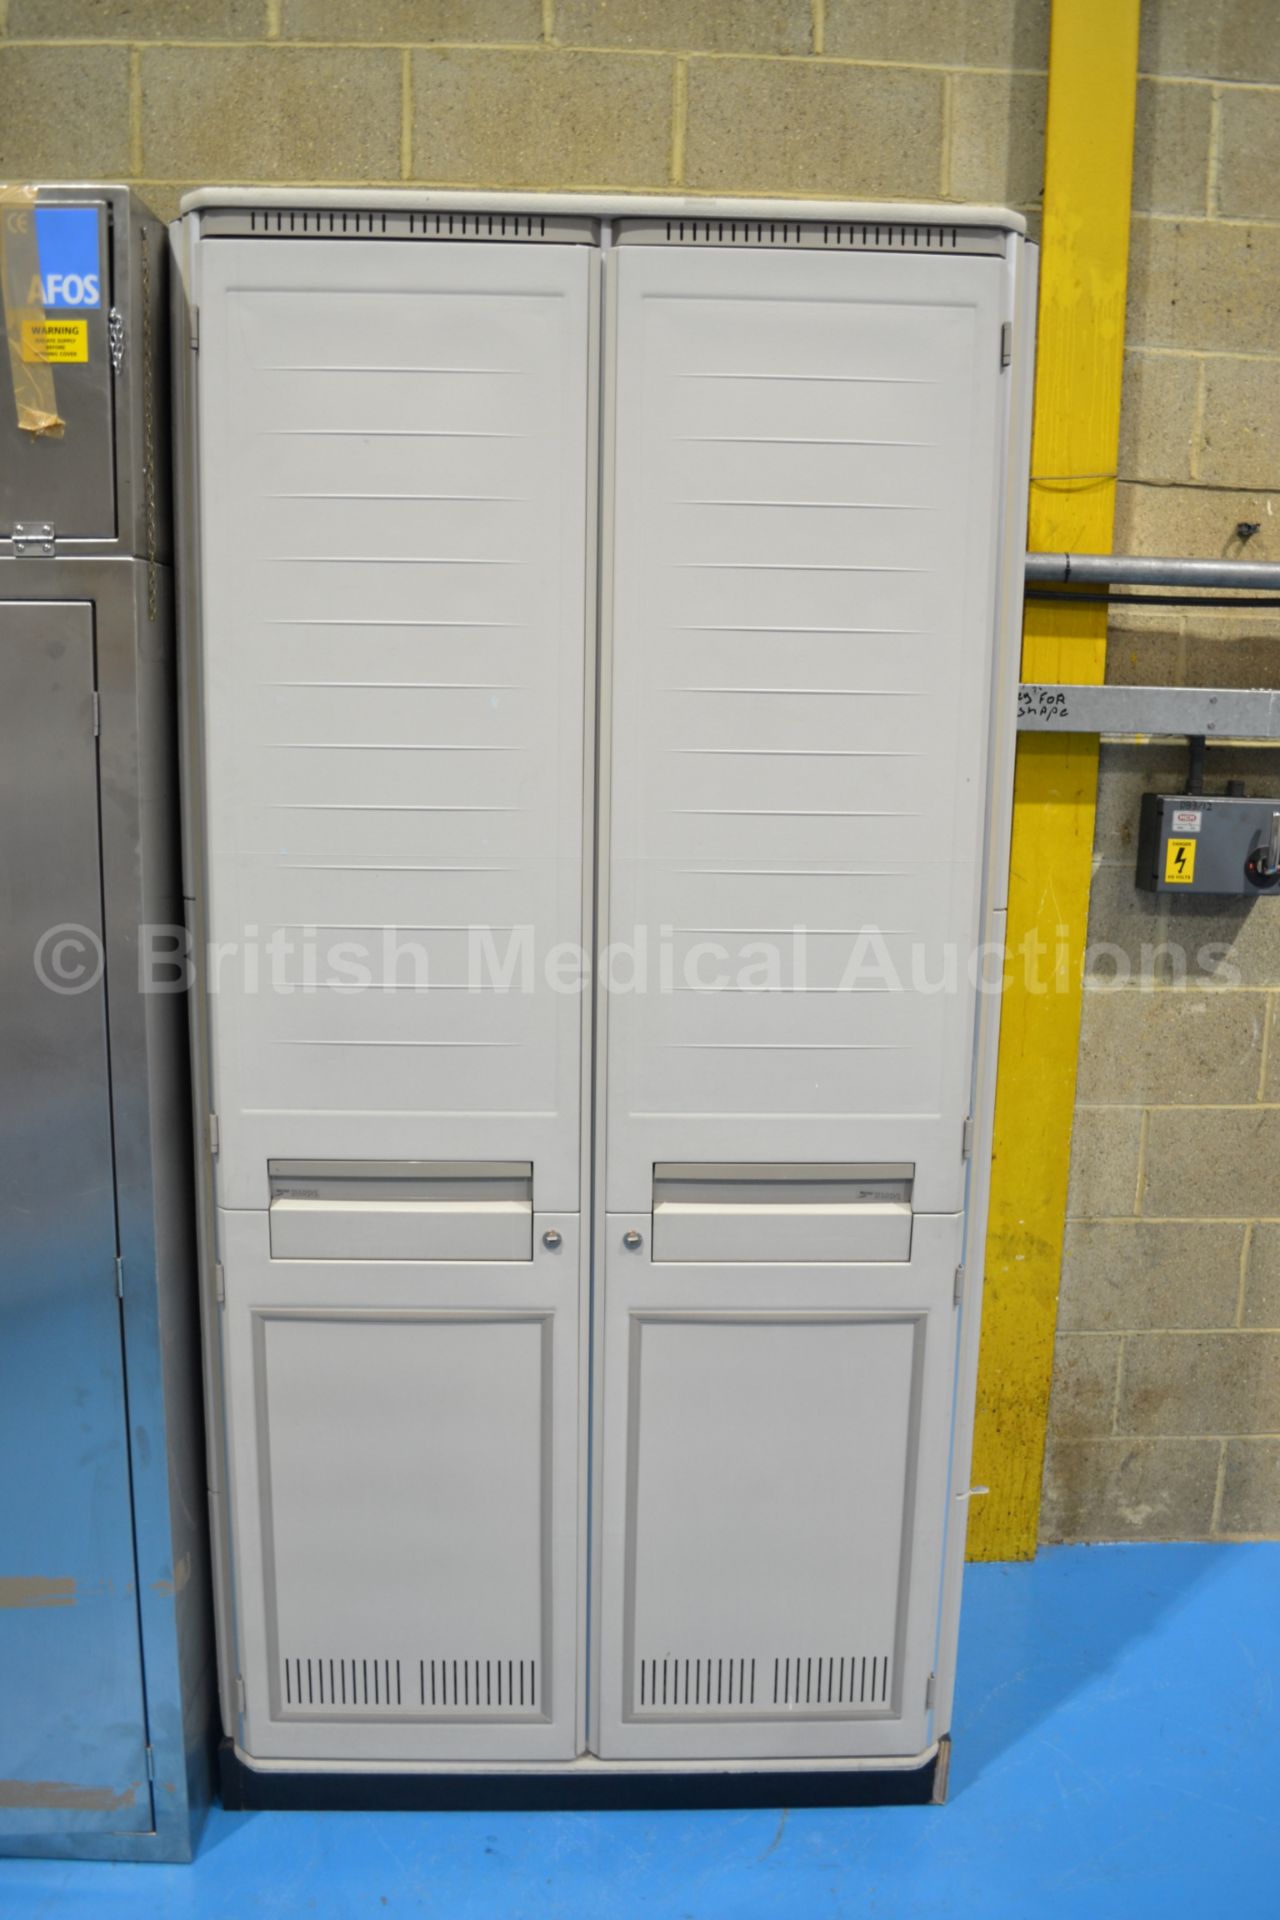 AFOS Endoscope Cabinet and Metro Starsys Endoscope - Image 5 of 5